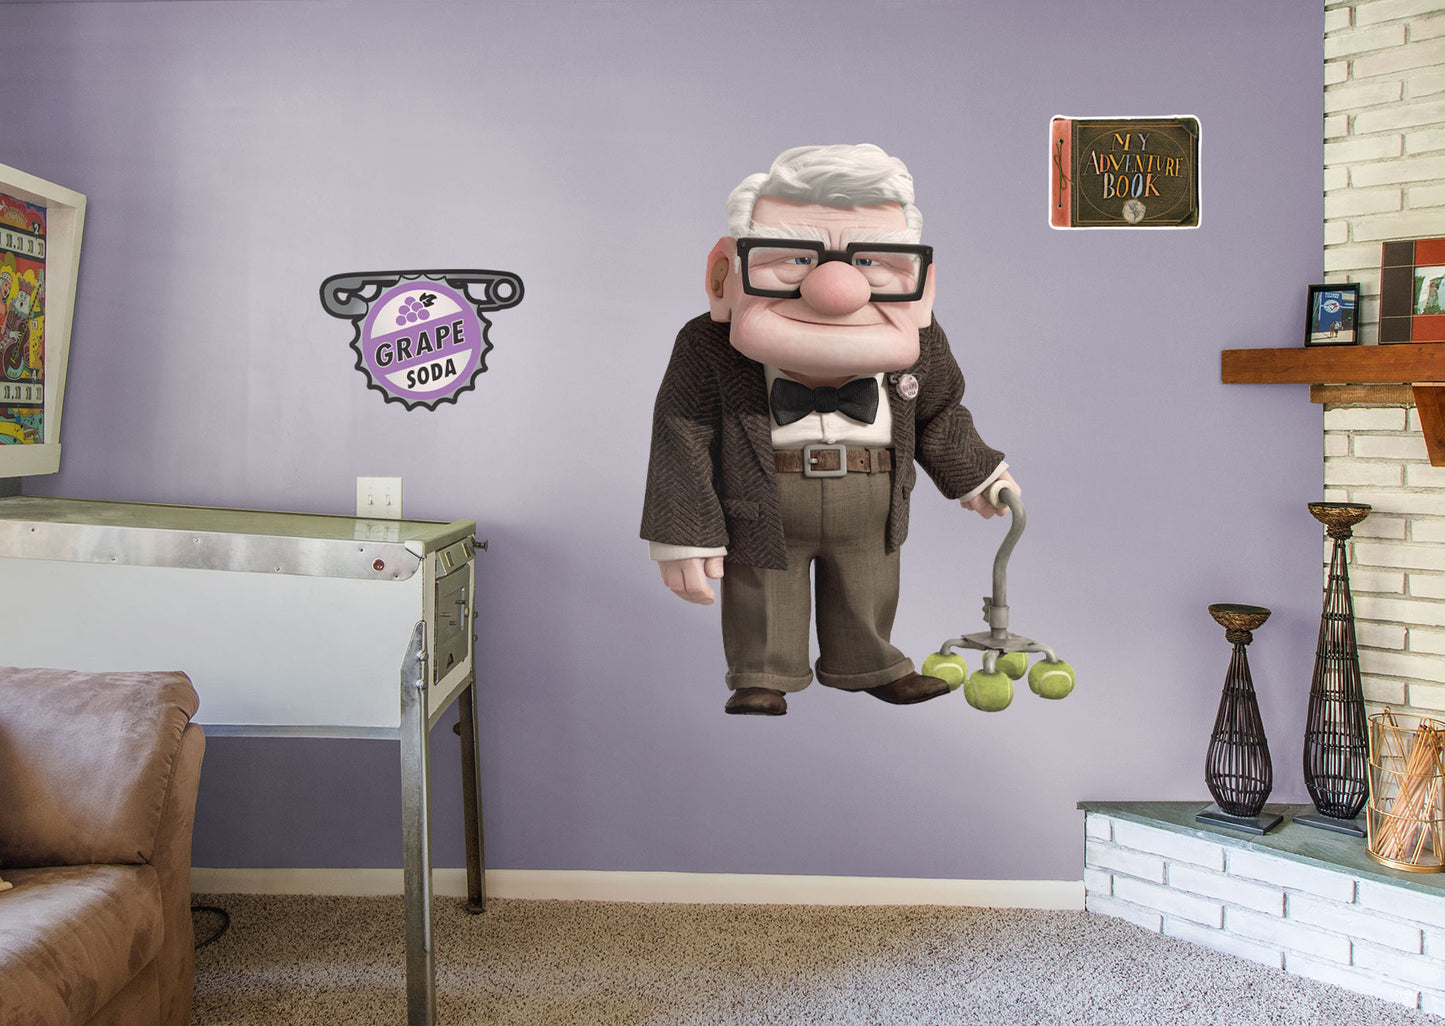 UP: Carl RealBig        - Officially Licensed Disney Removable Wall   Adhesive Decal